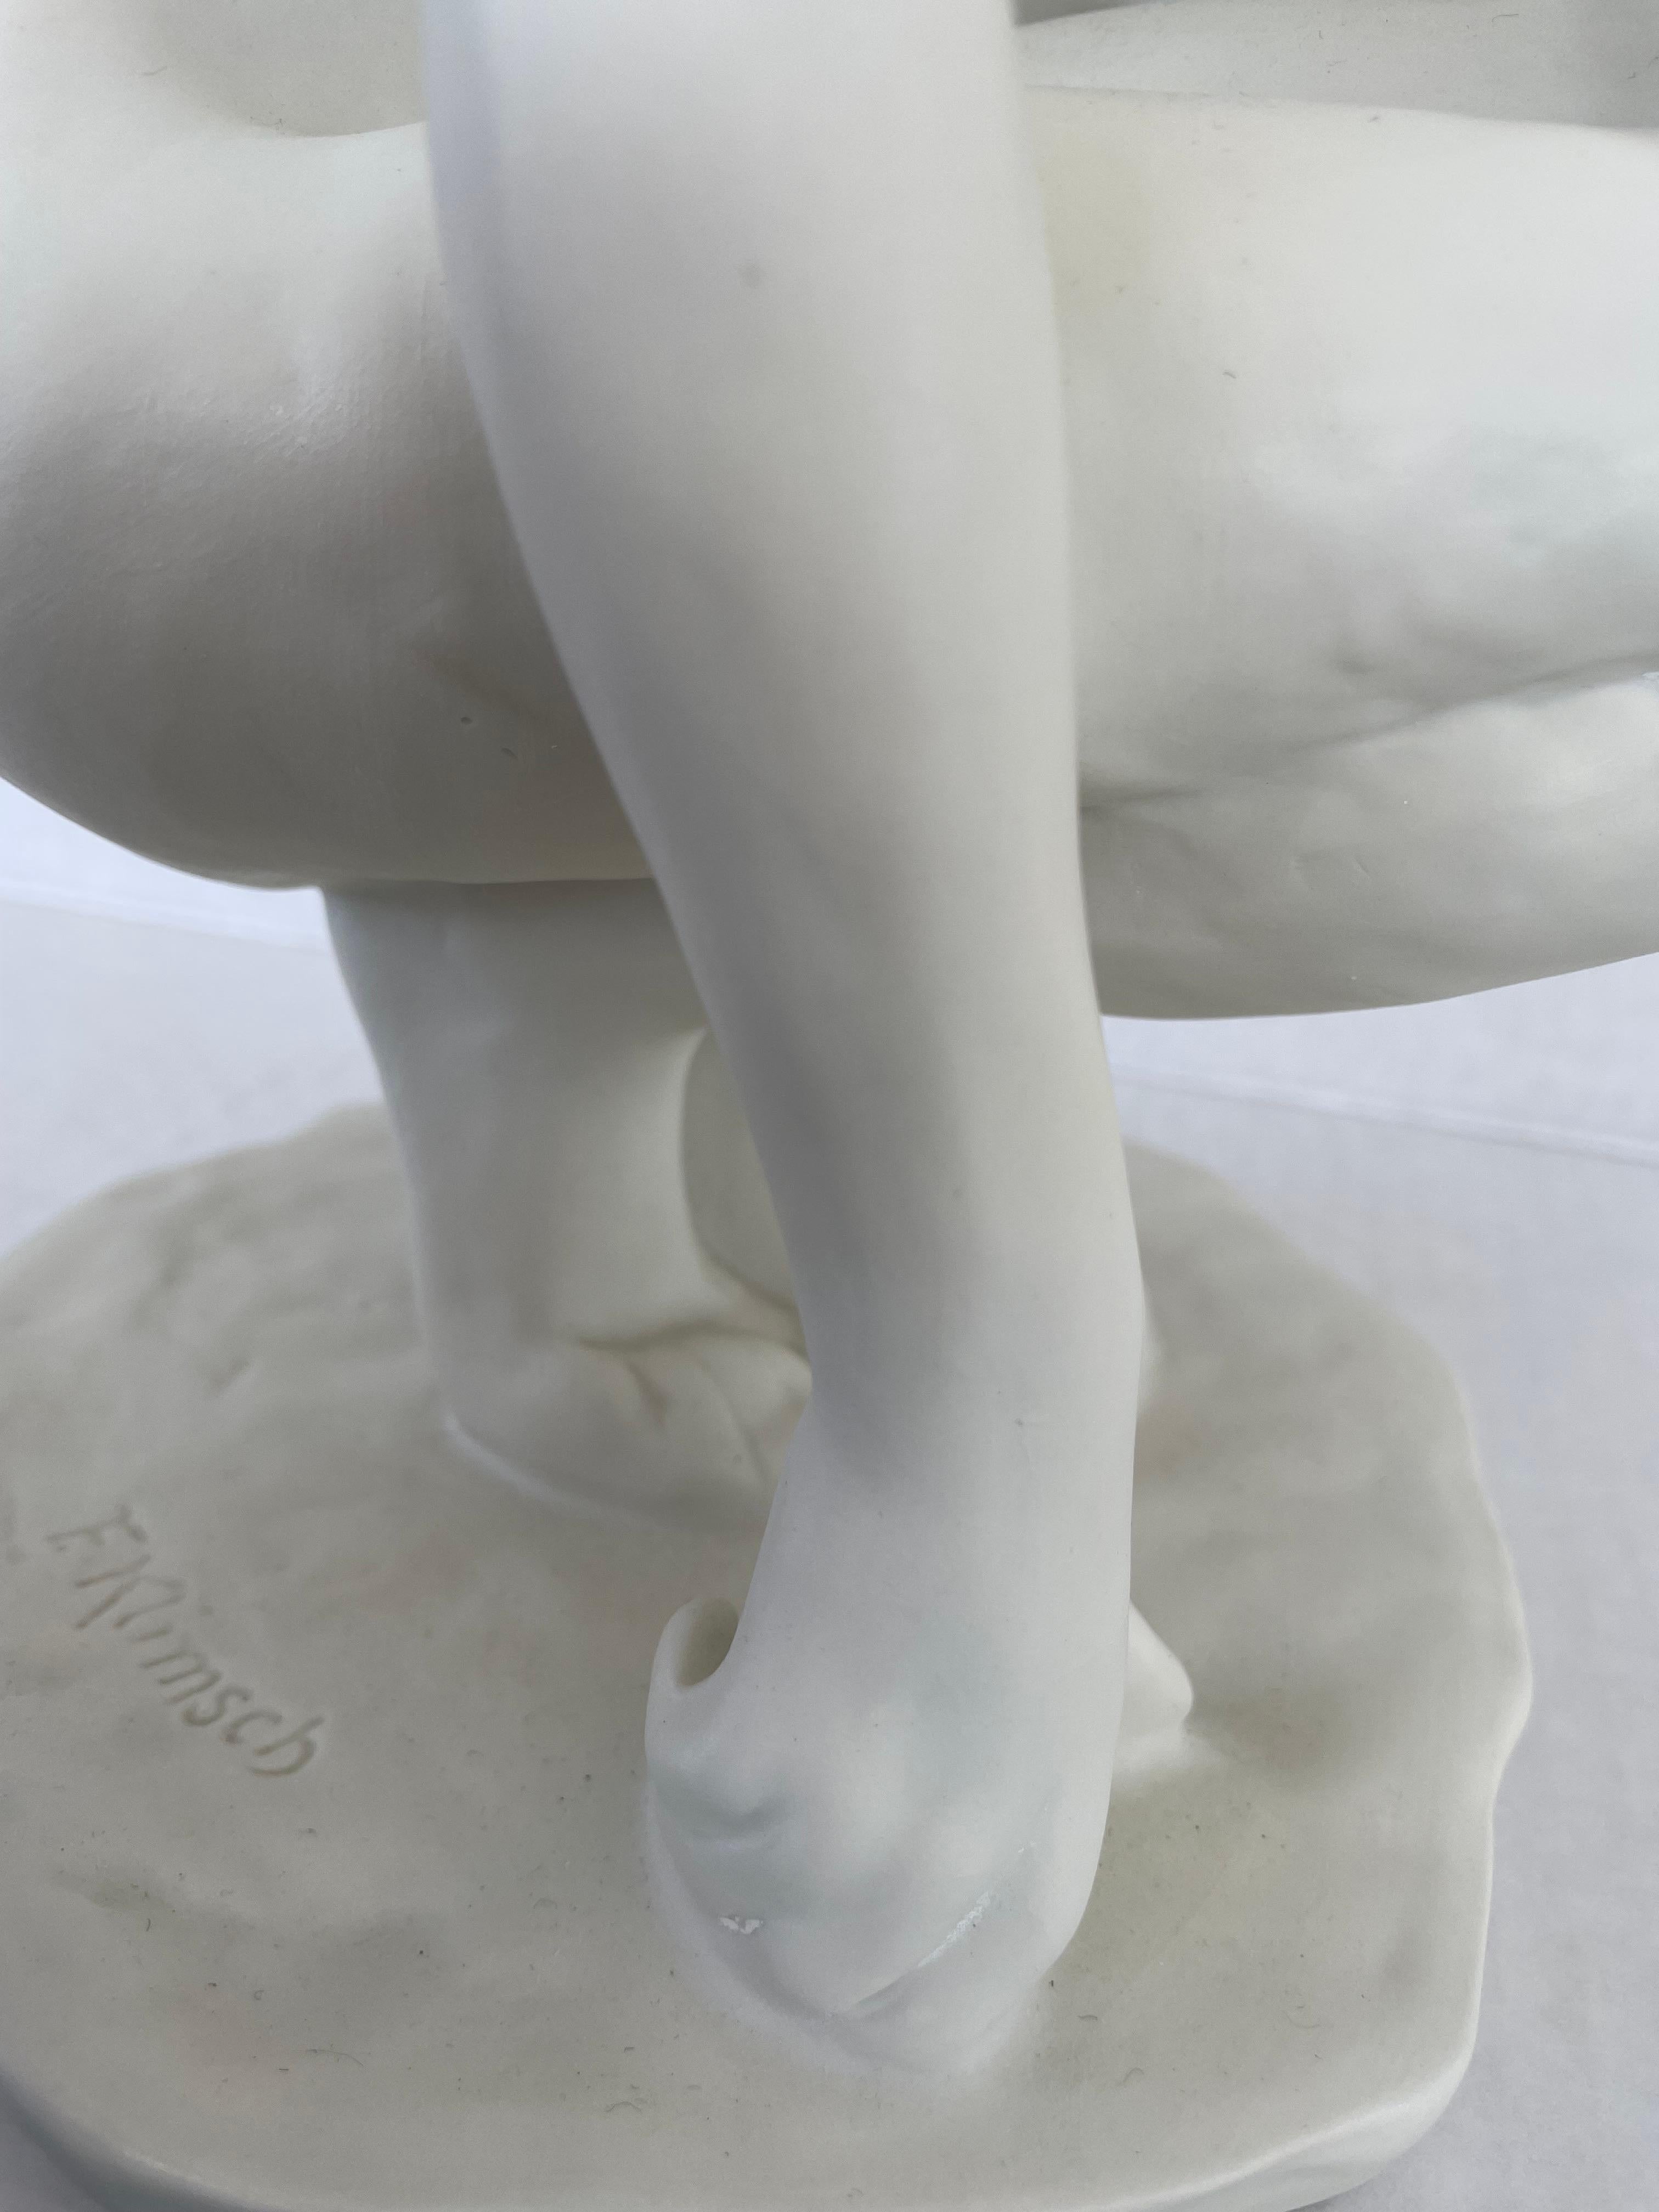 Roenthal Figure of a Nude Female 